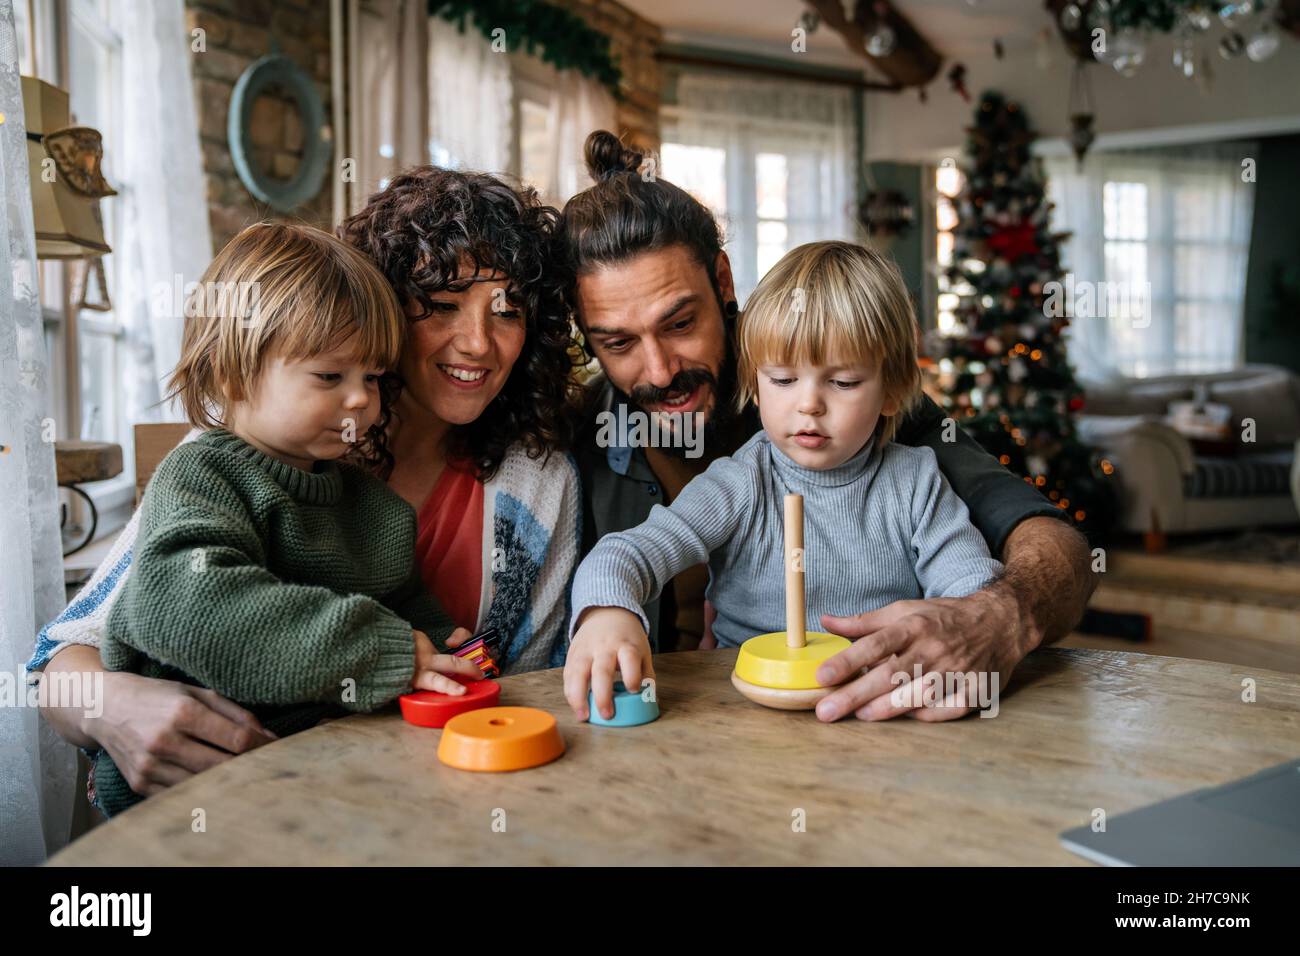 Family and childhood concept. Young parents spending time together with children at home. Stock Photo